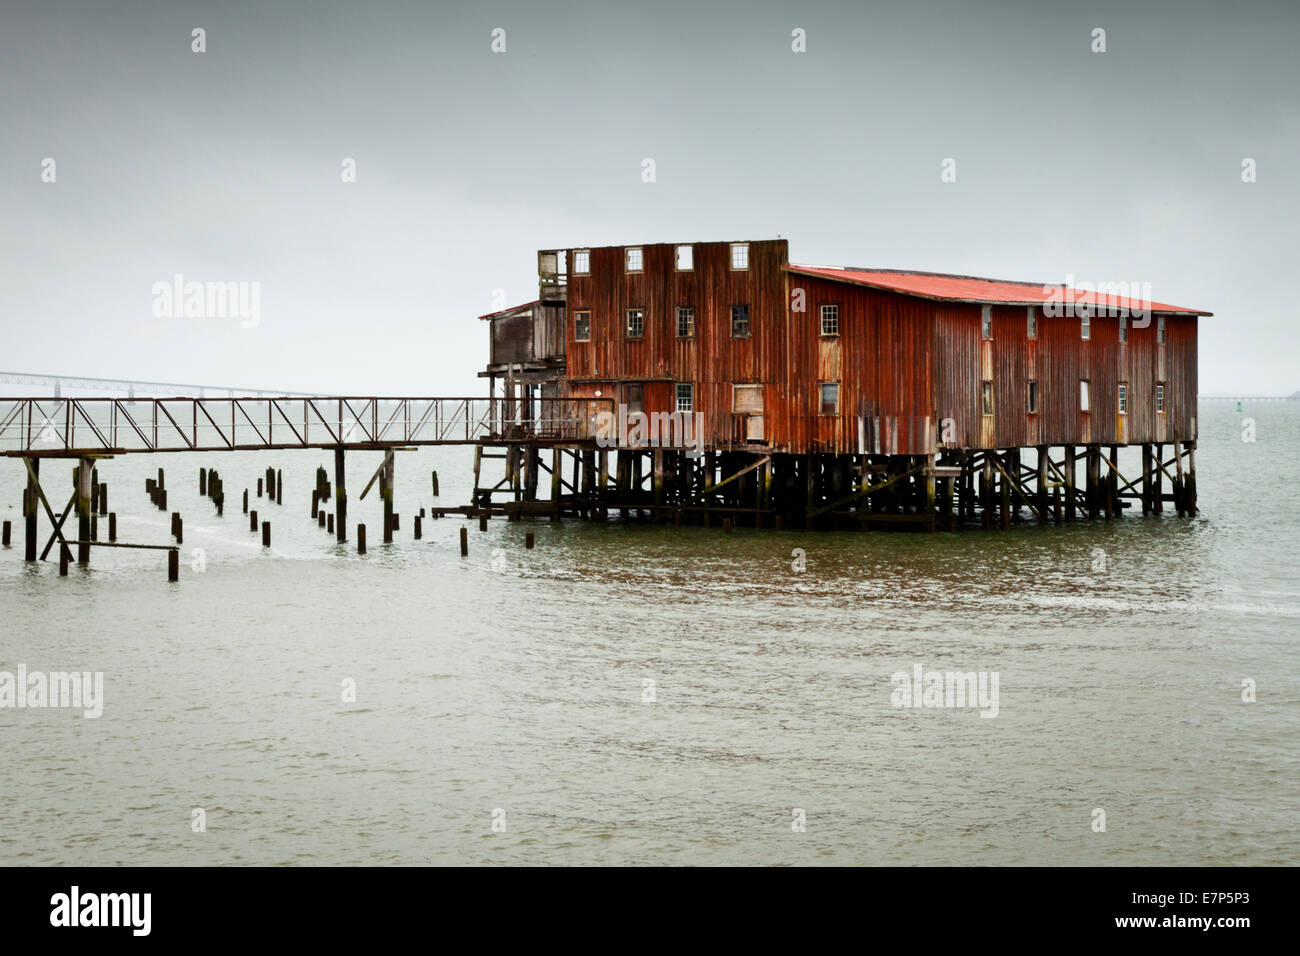 Big Red, the iconic net drying loft, in the Columbia River near Astoria, Oregon, 2012, before renovations. Stock Photo